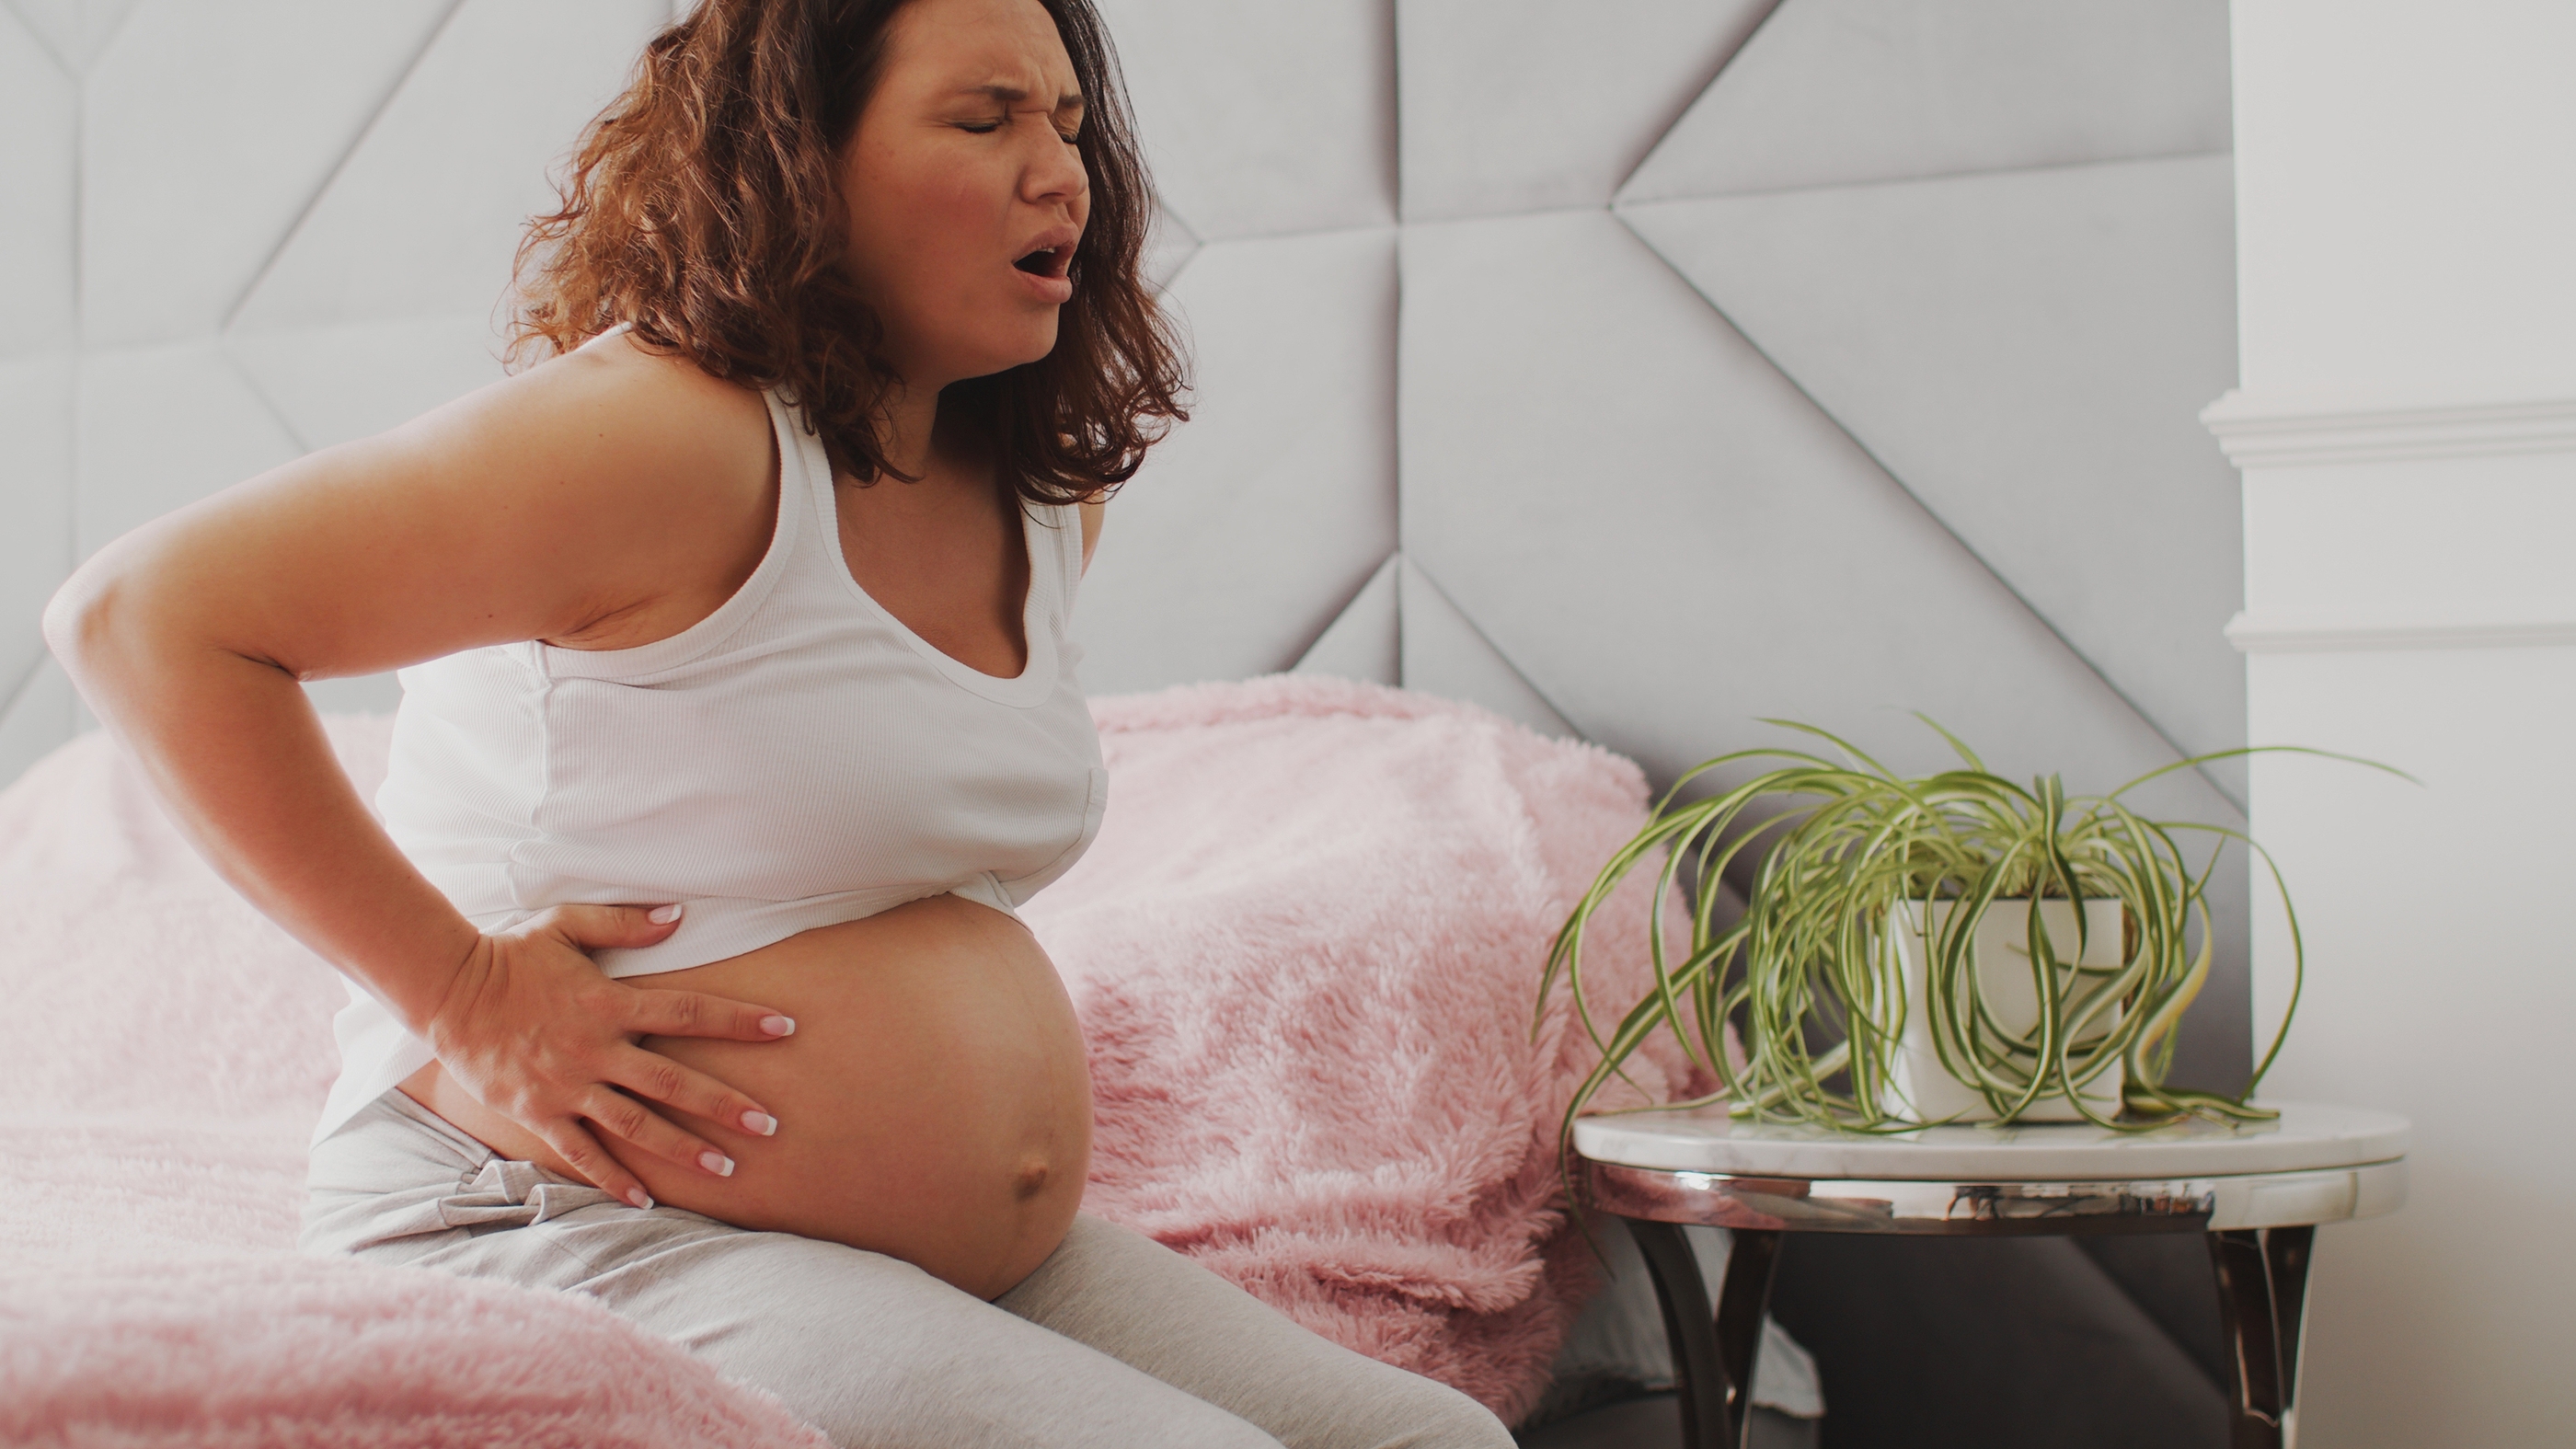 Kidney Stones While Pregnant: Symptoms and Treatment - Advanced Gynecology